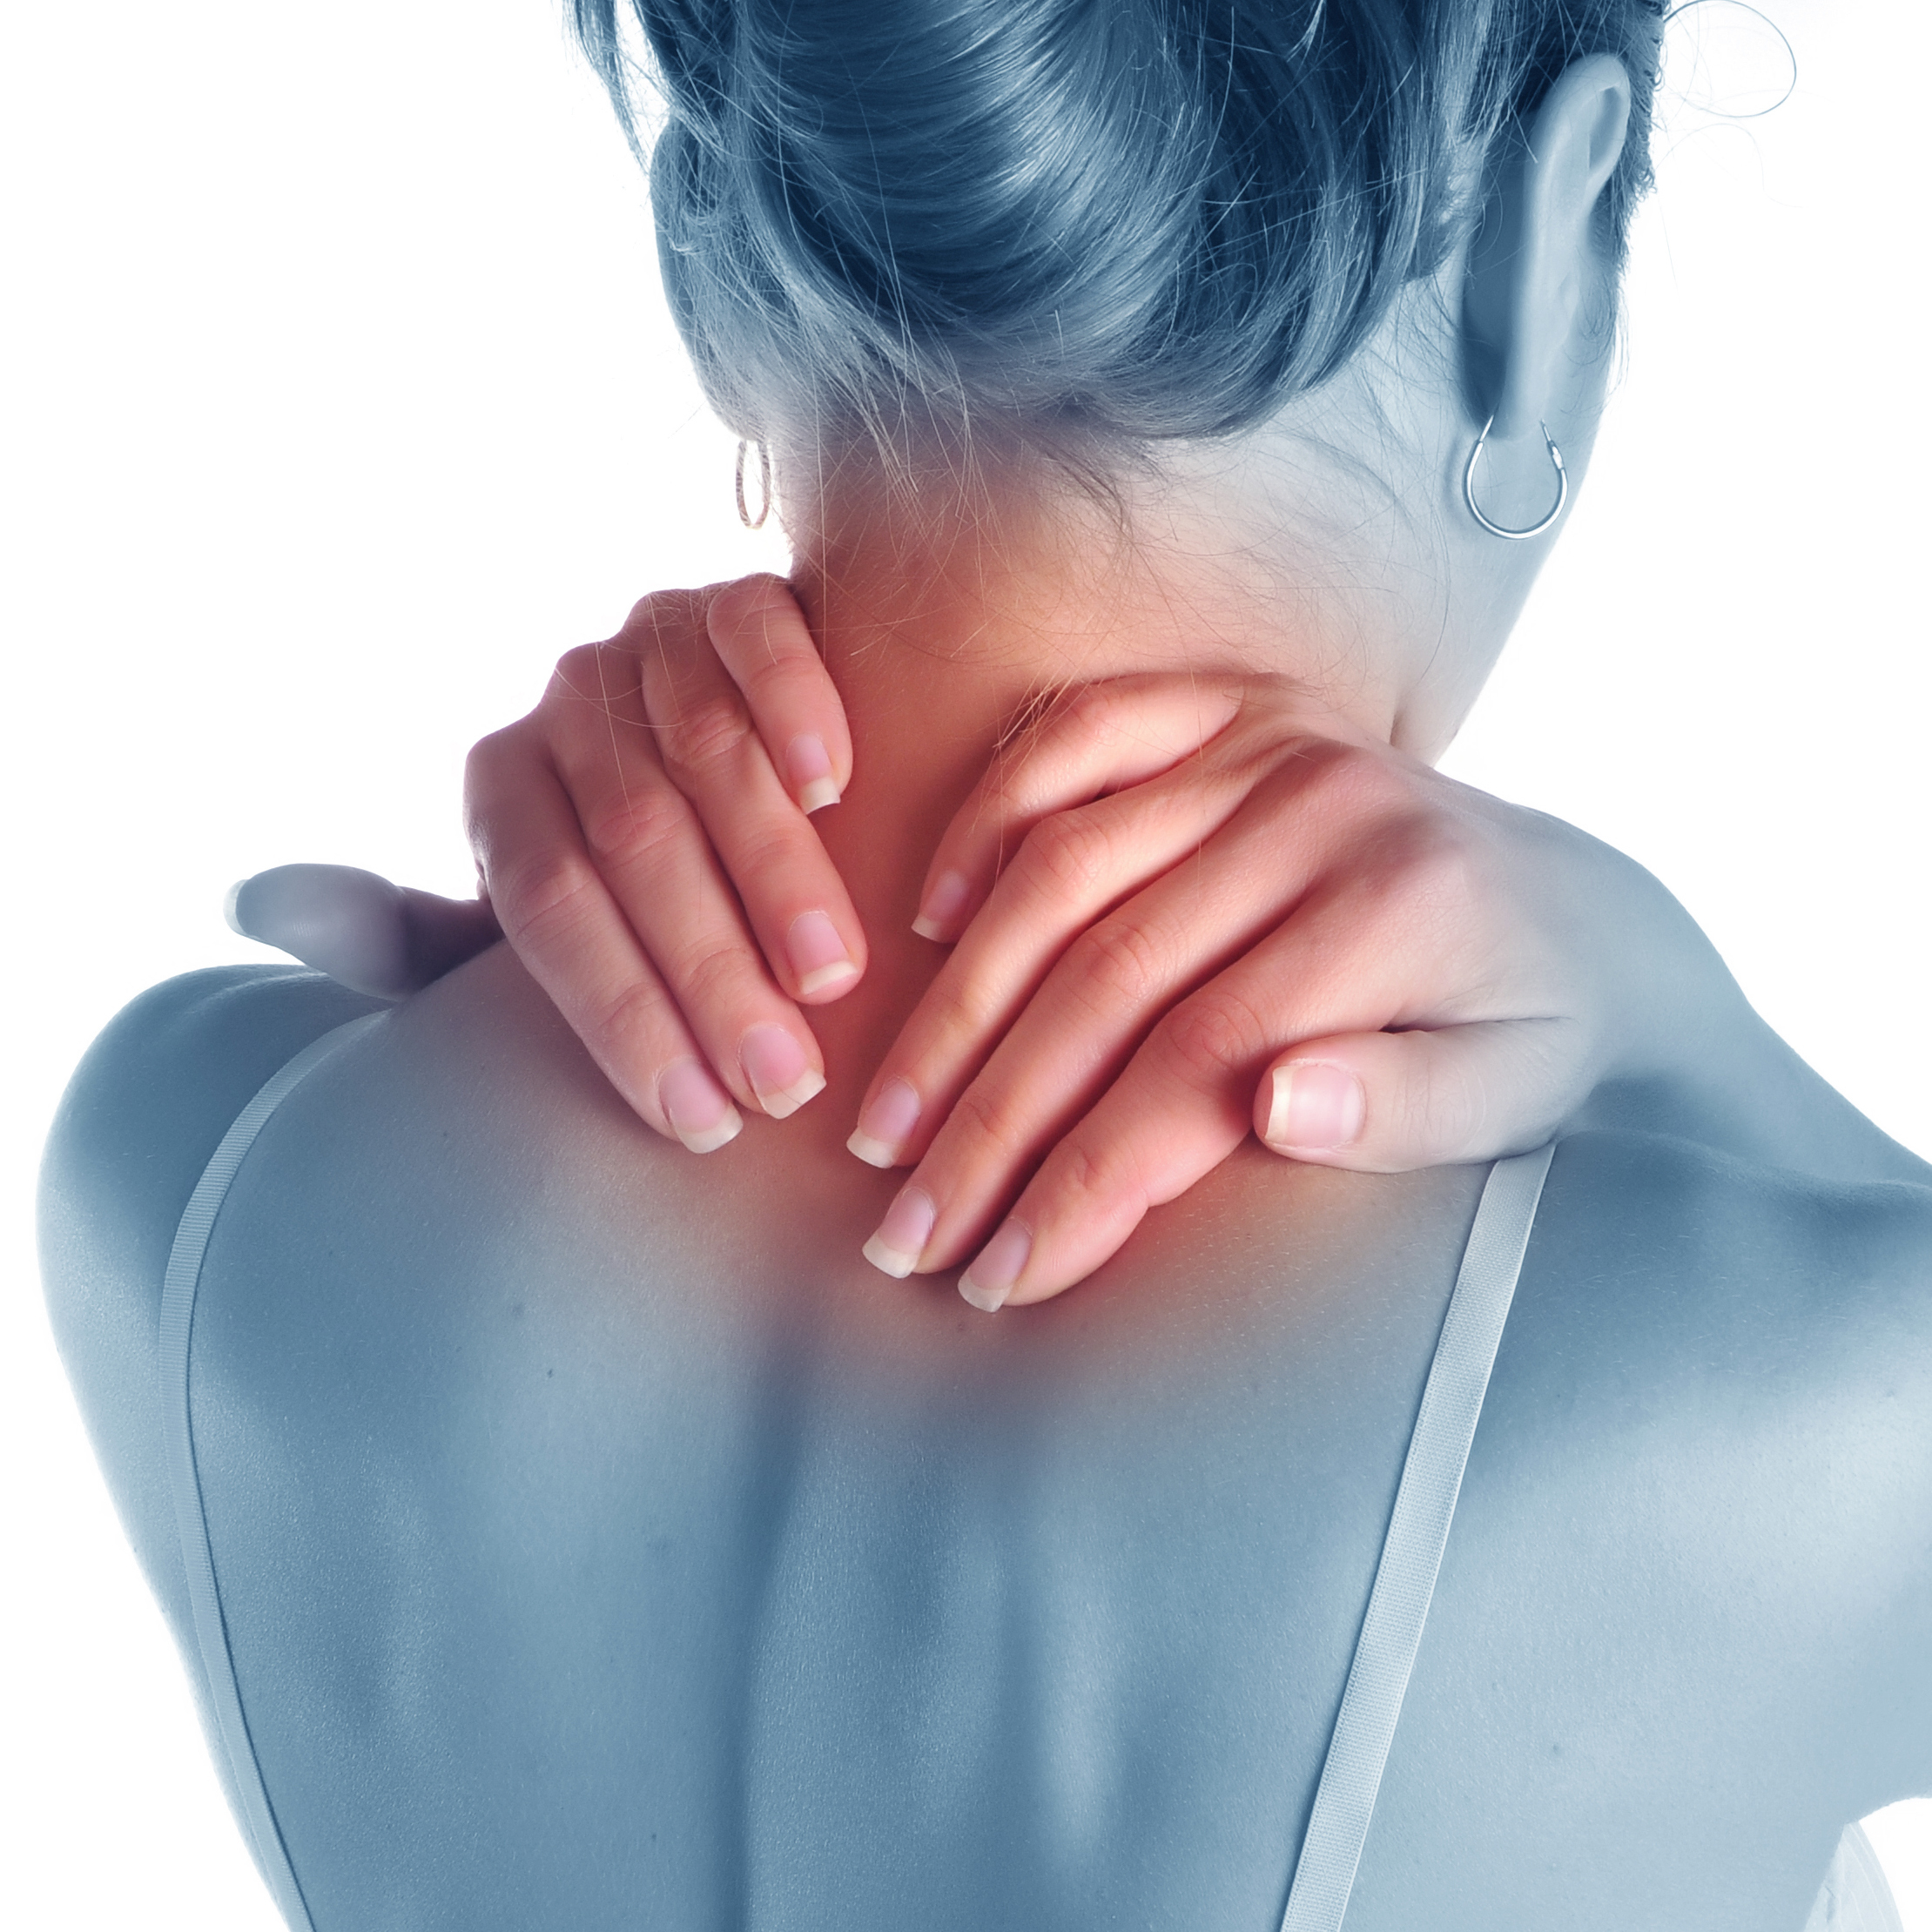 Can Sore Neck Muscles Cause a Bad Headache?